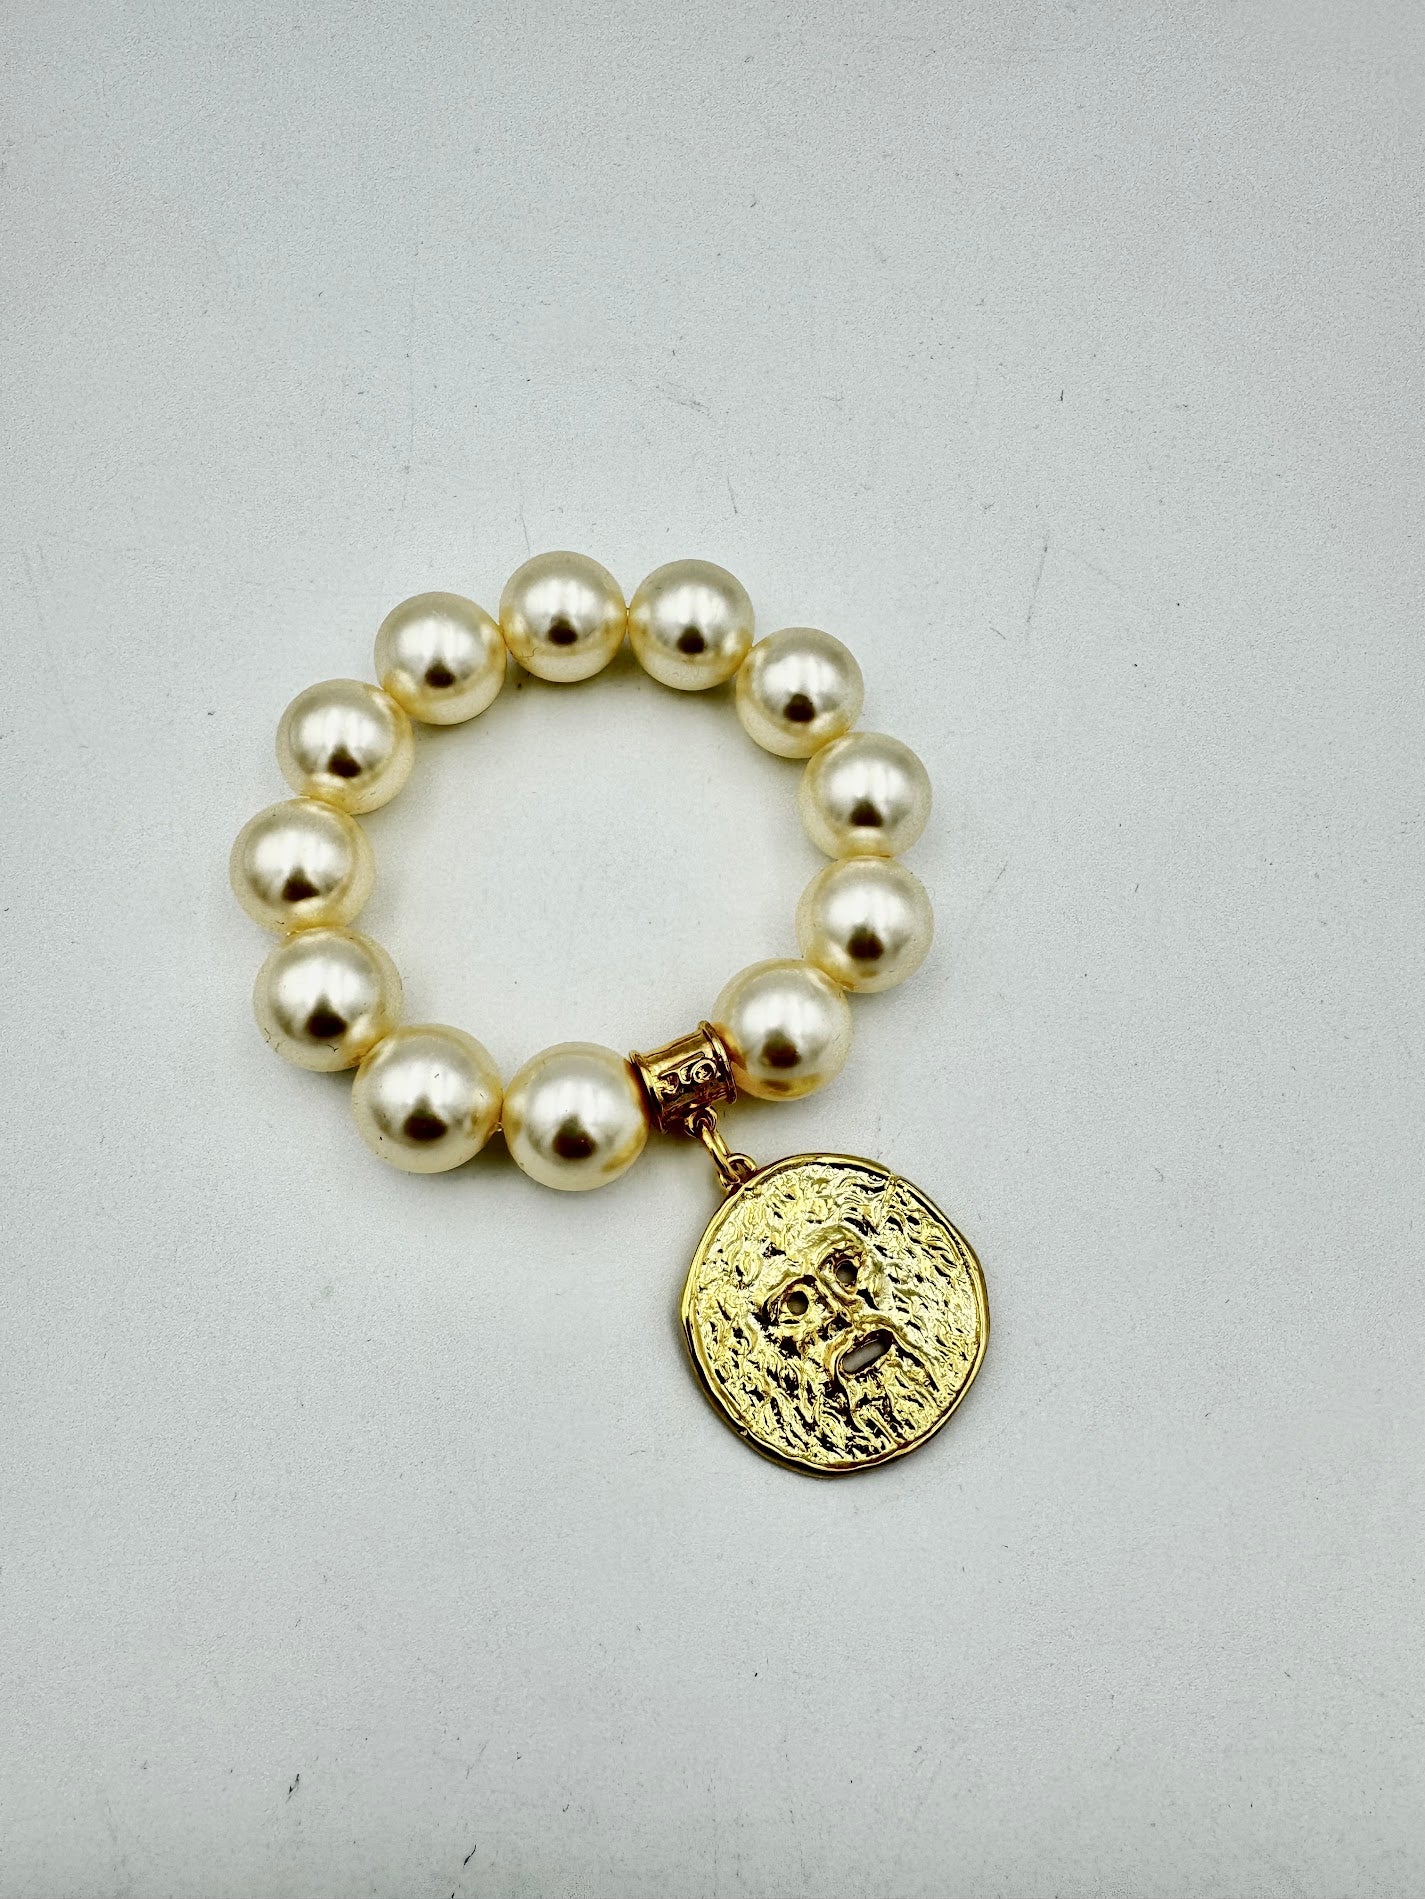 Italian Treasures Collection Mouth of Truths Bracelet